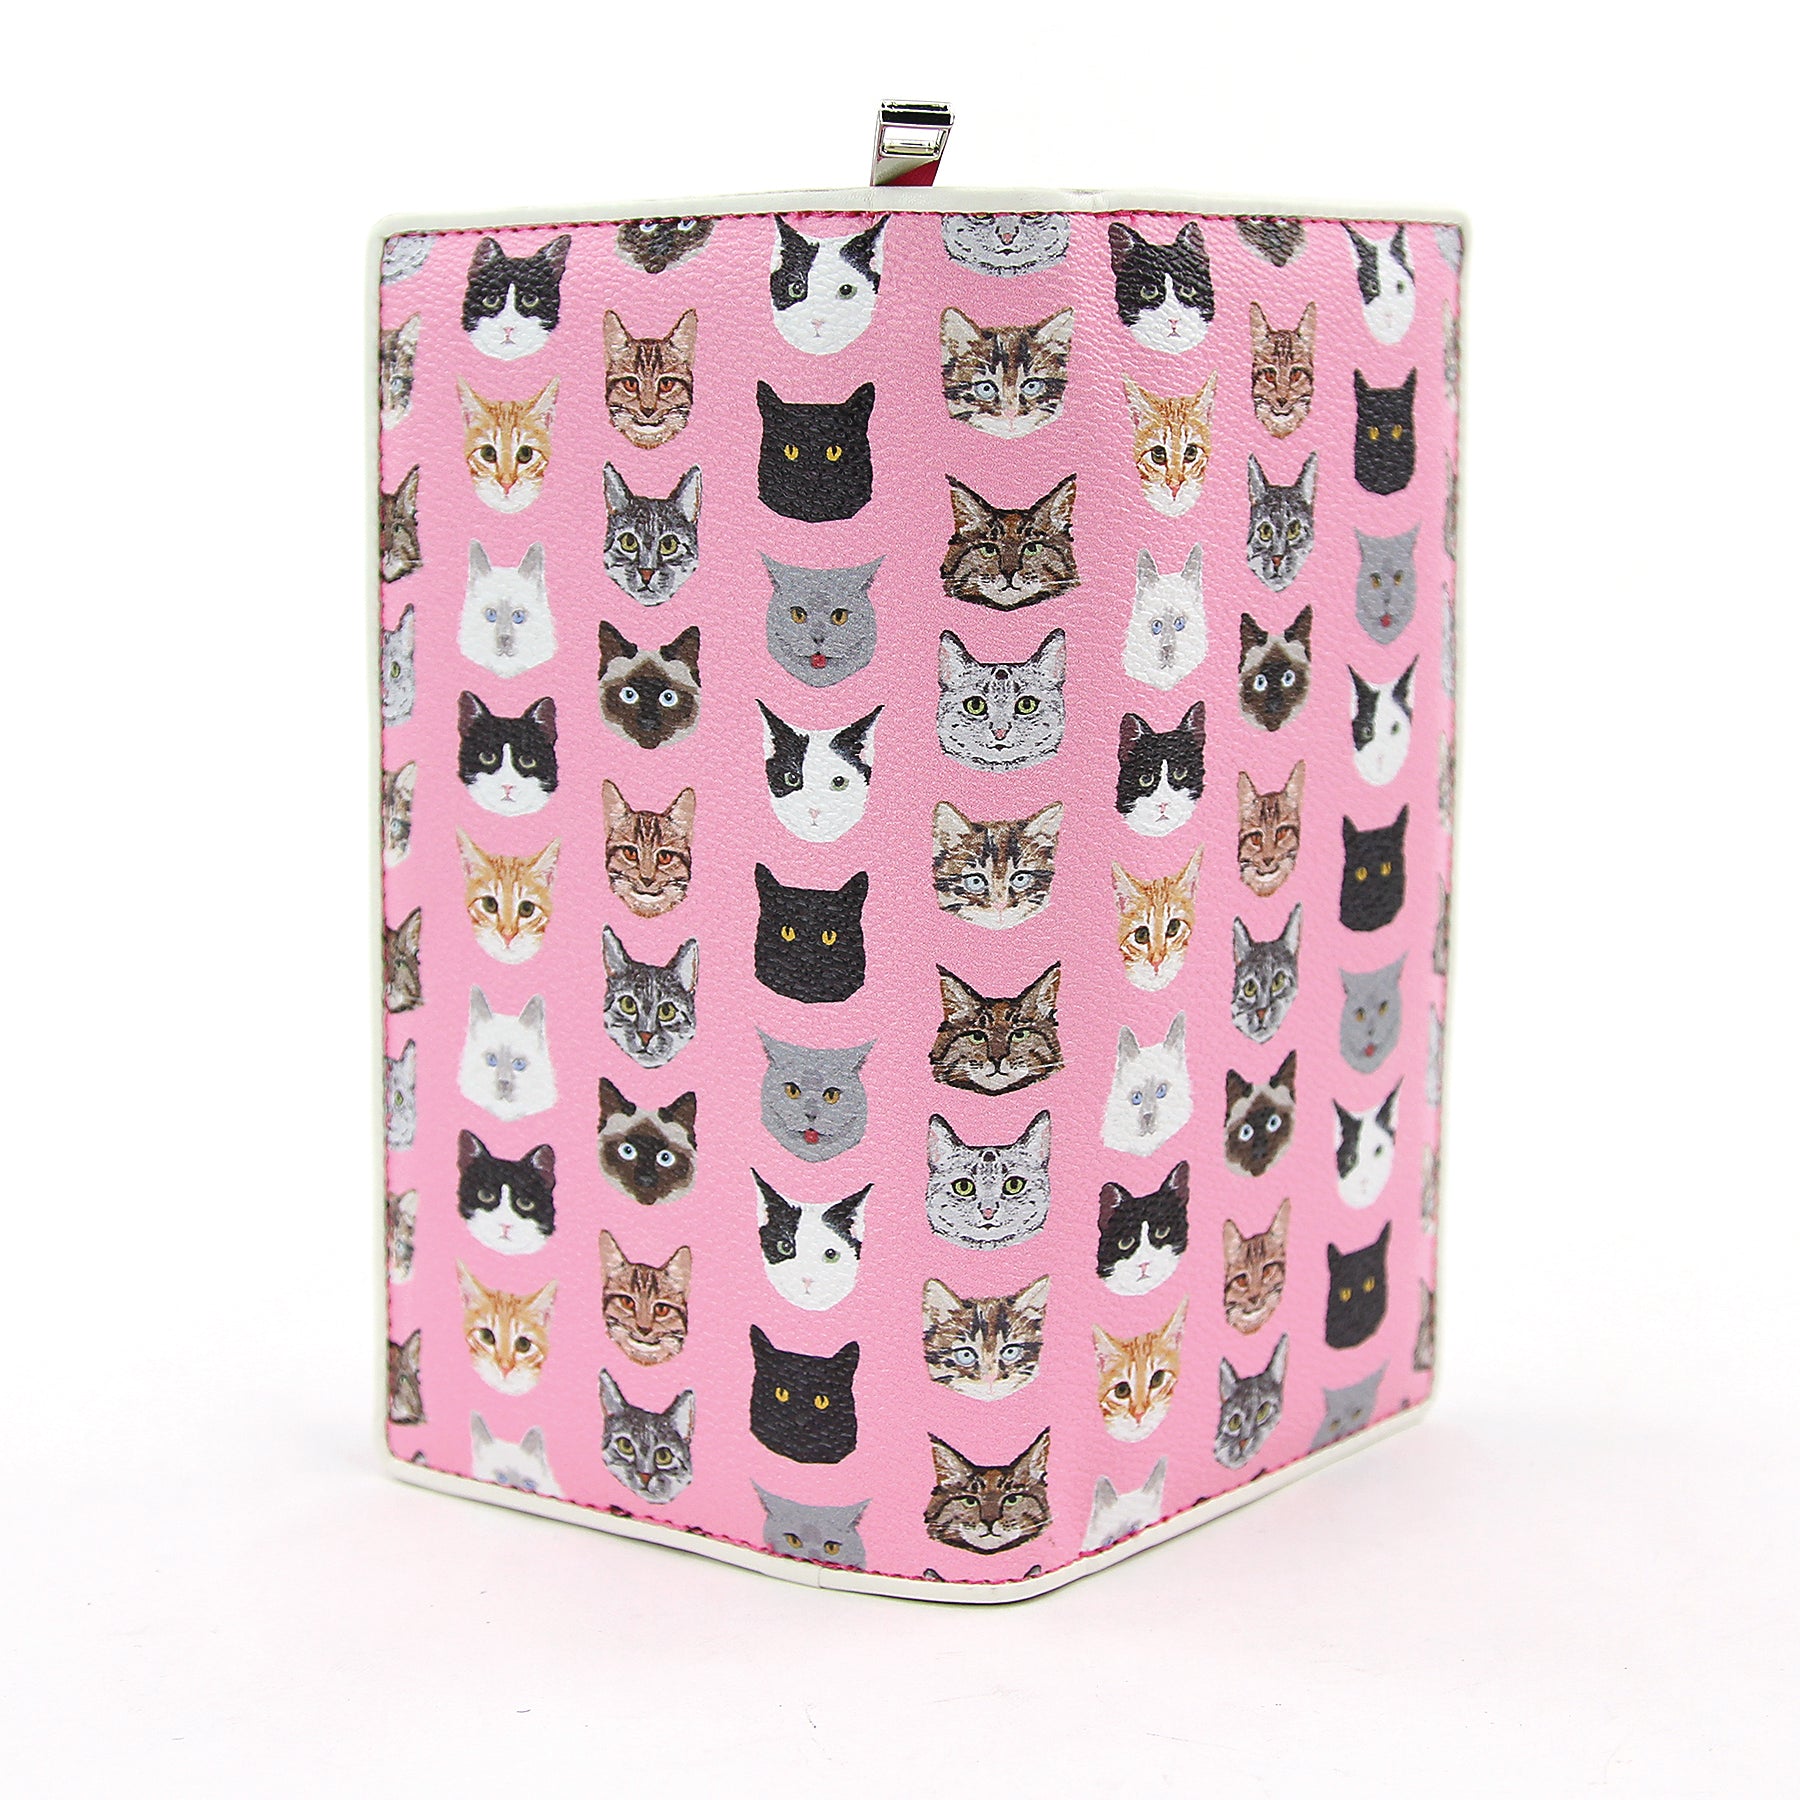 Cat Faces in Pink Wallet open frontal view